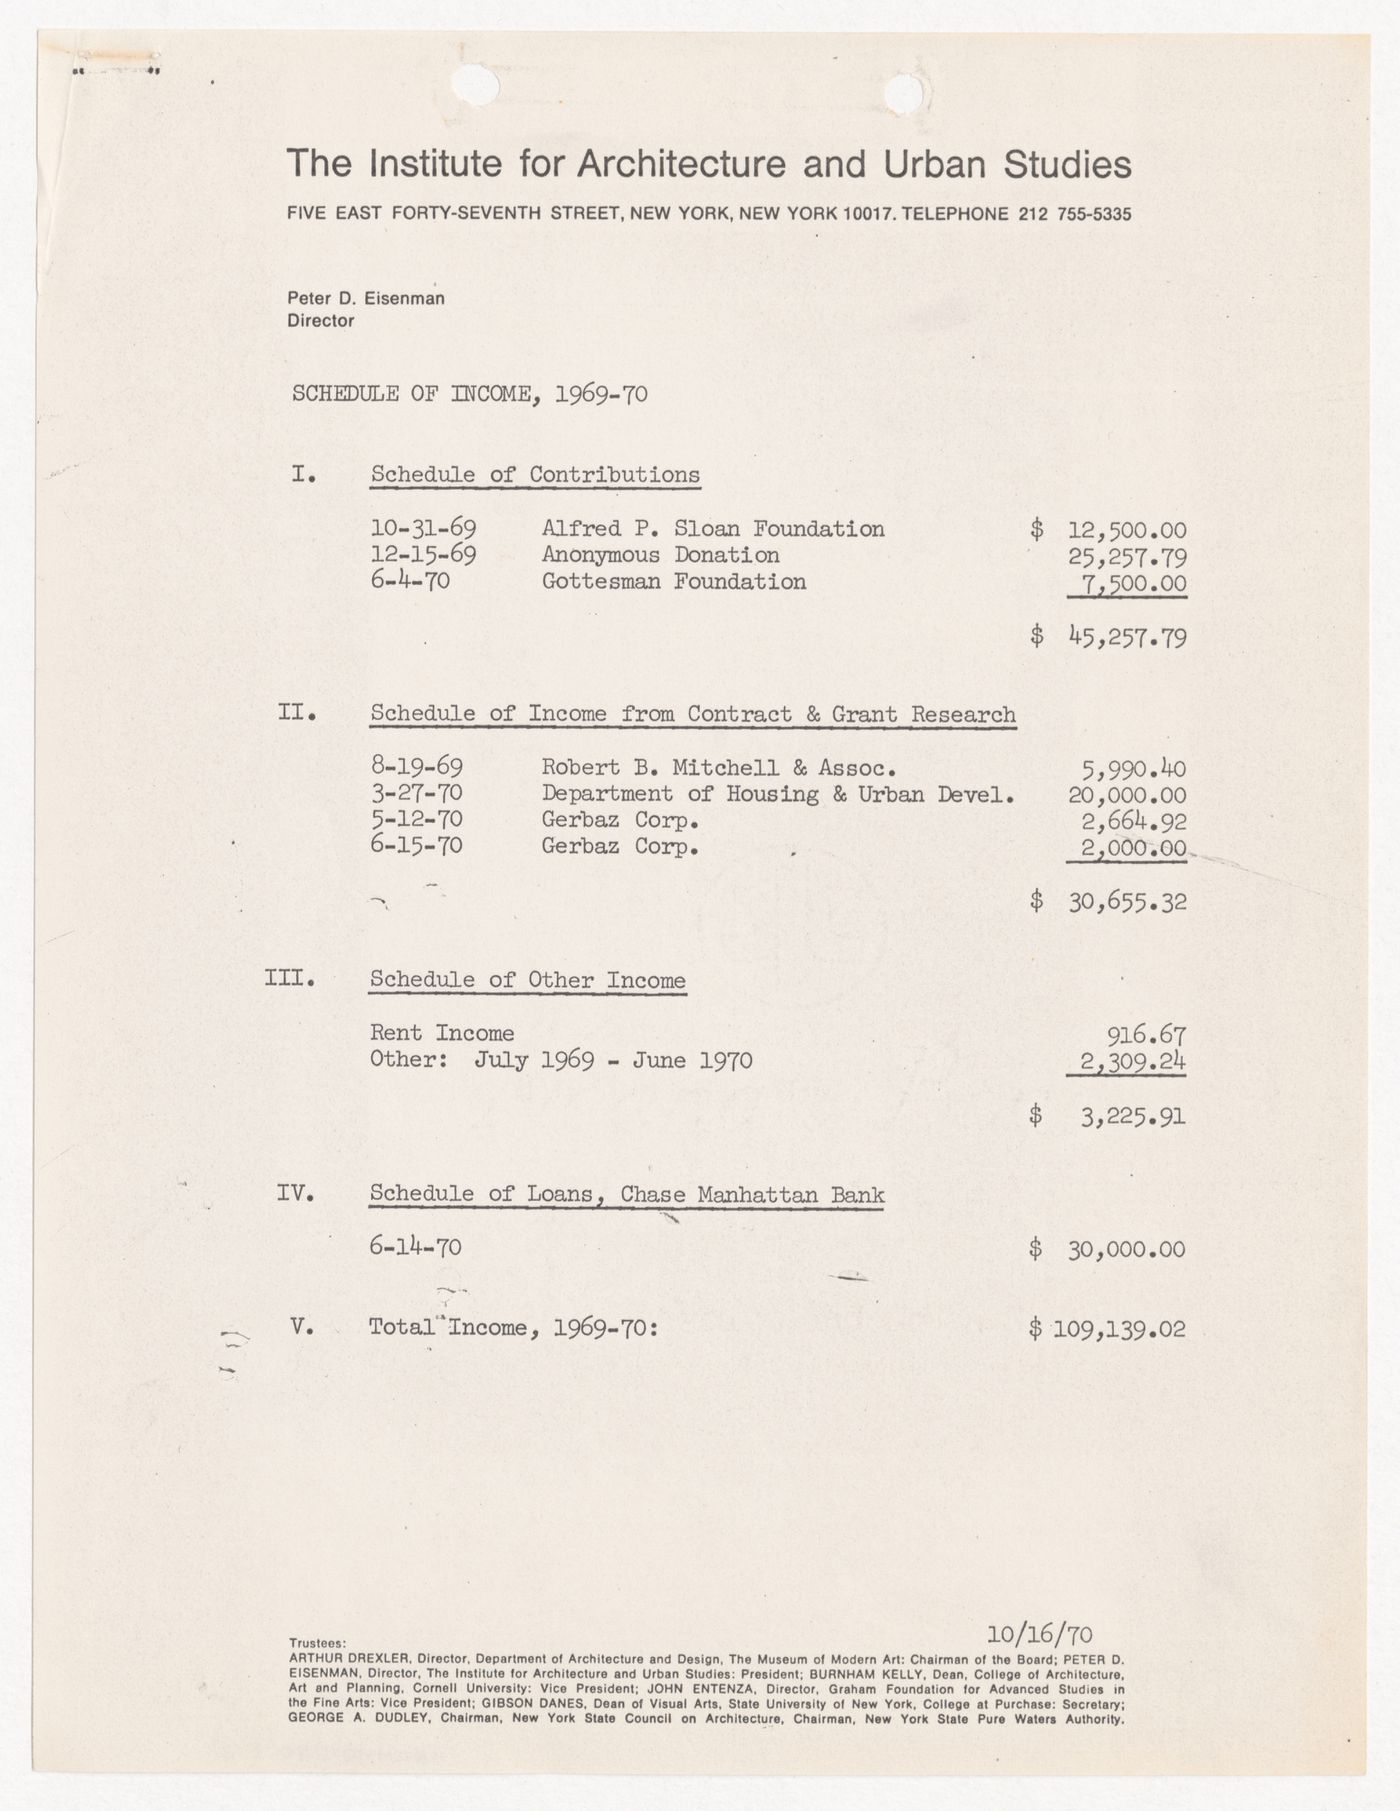 Schedule of income, expendidutes and reconciliation of income and expenditures for financial year 1969-1970